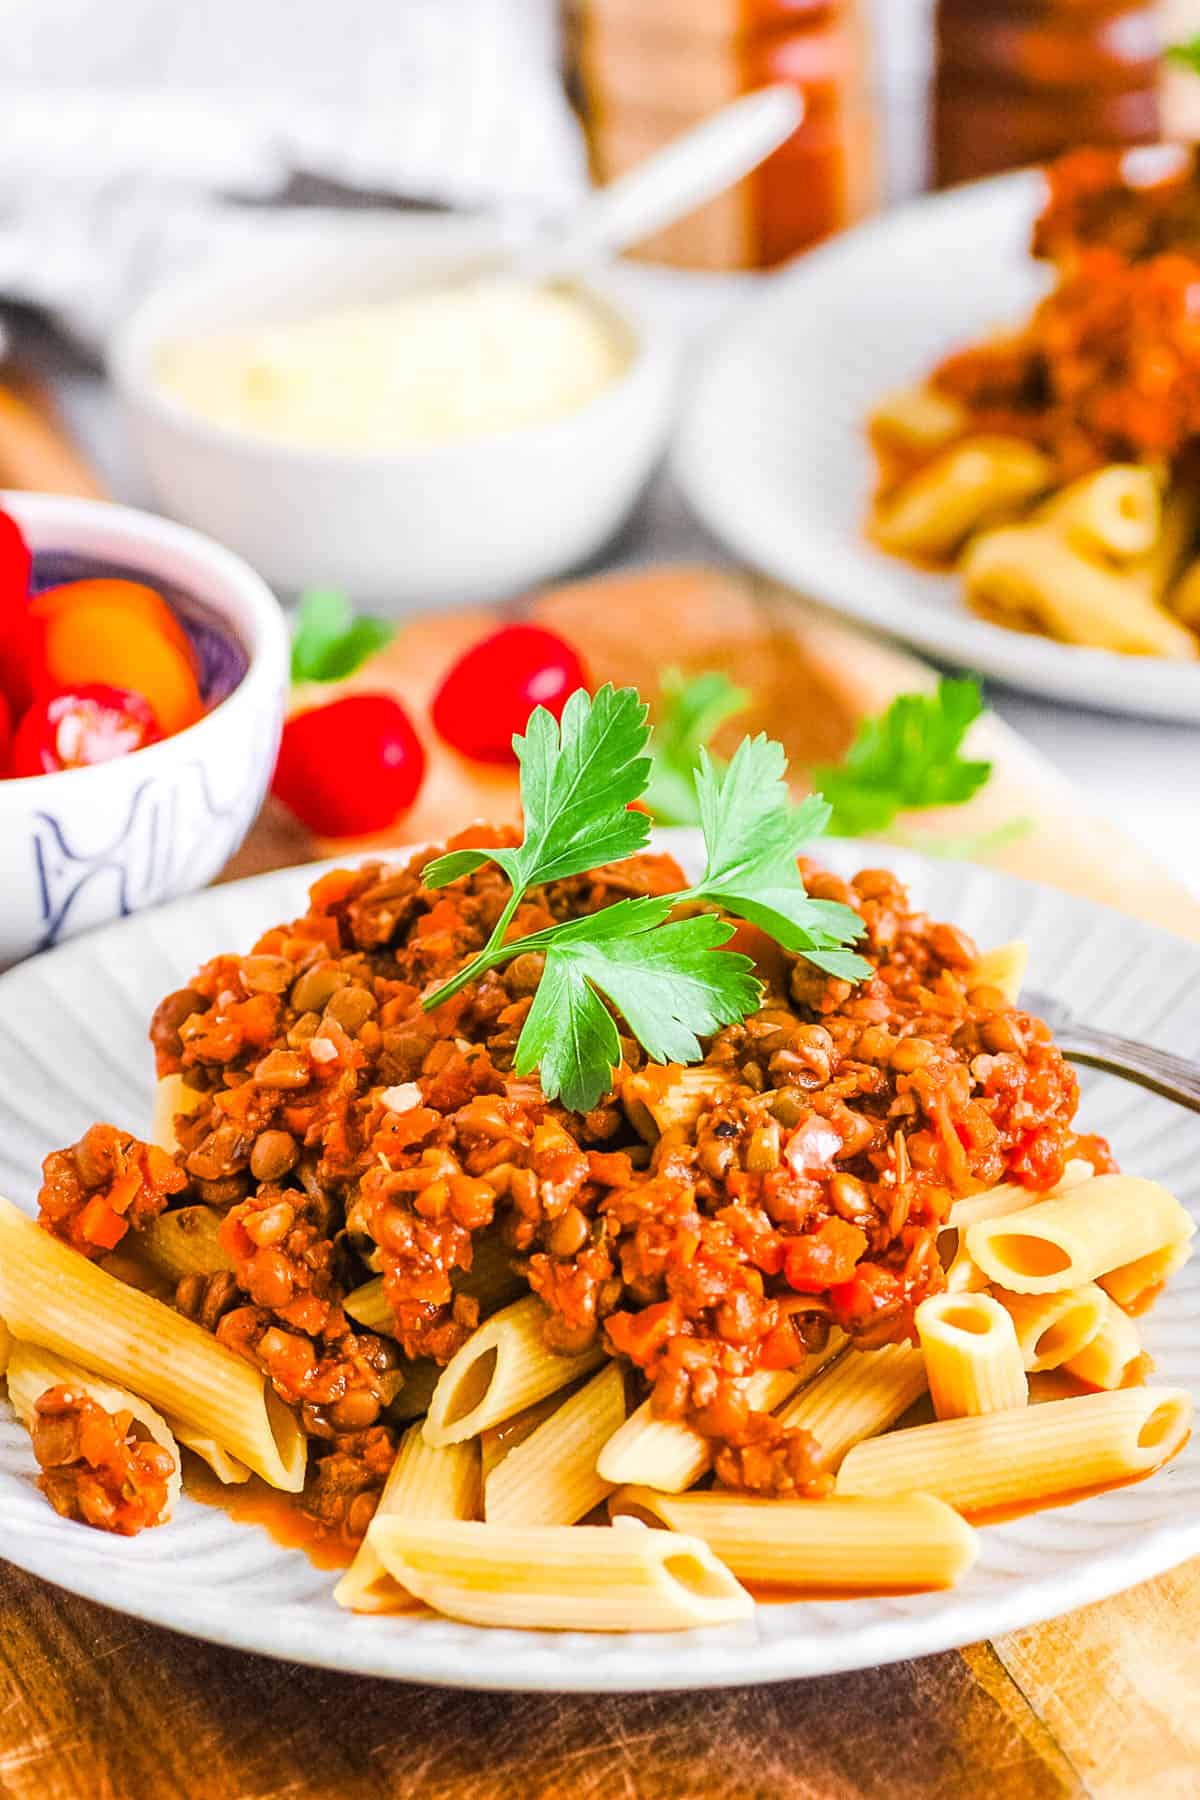 Vegan bolognese with lentils on top of penne pasta, on a white plate with a parsley garnish.